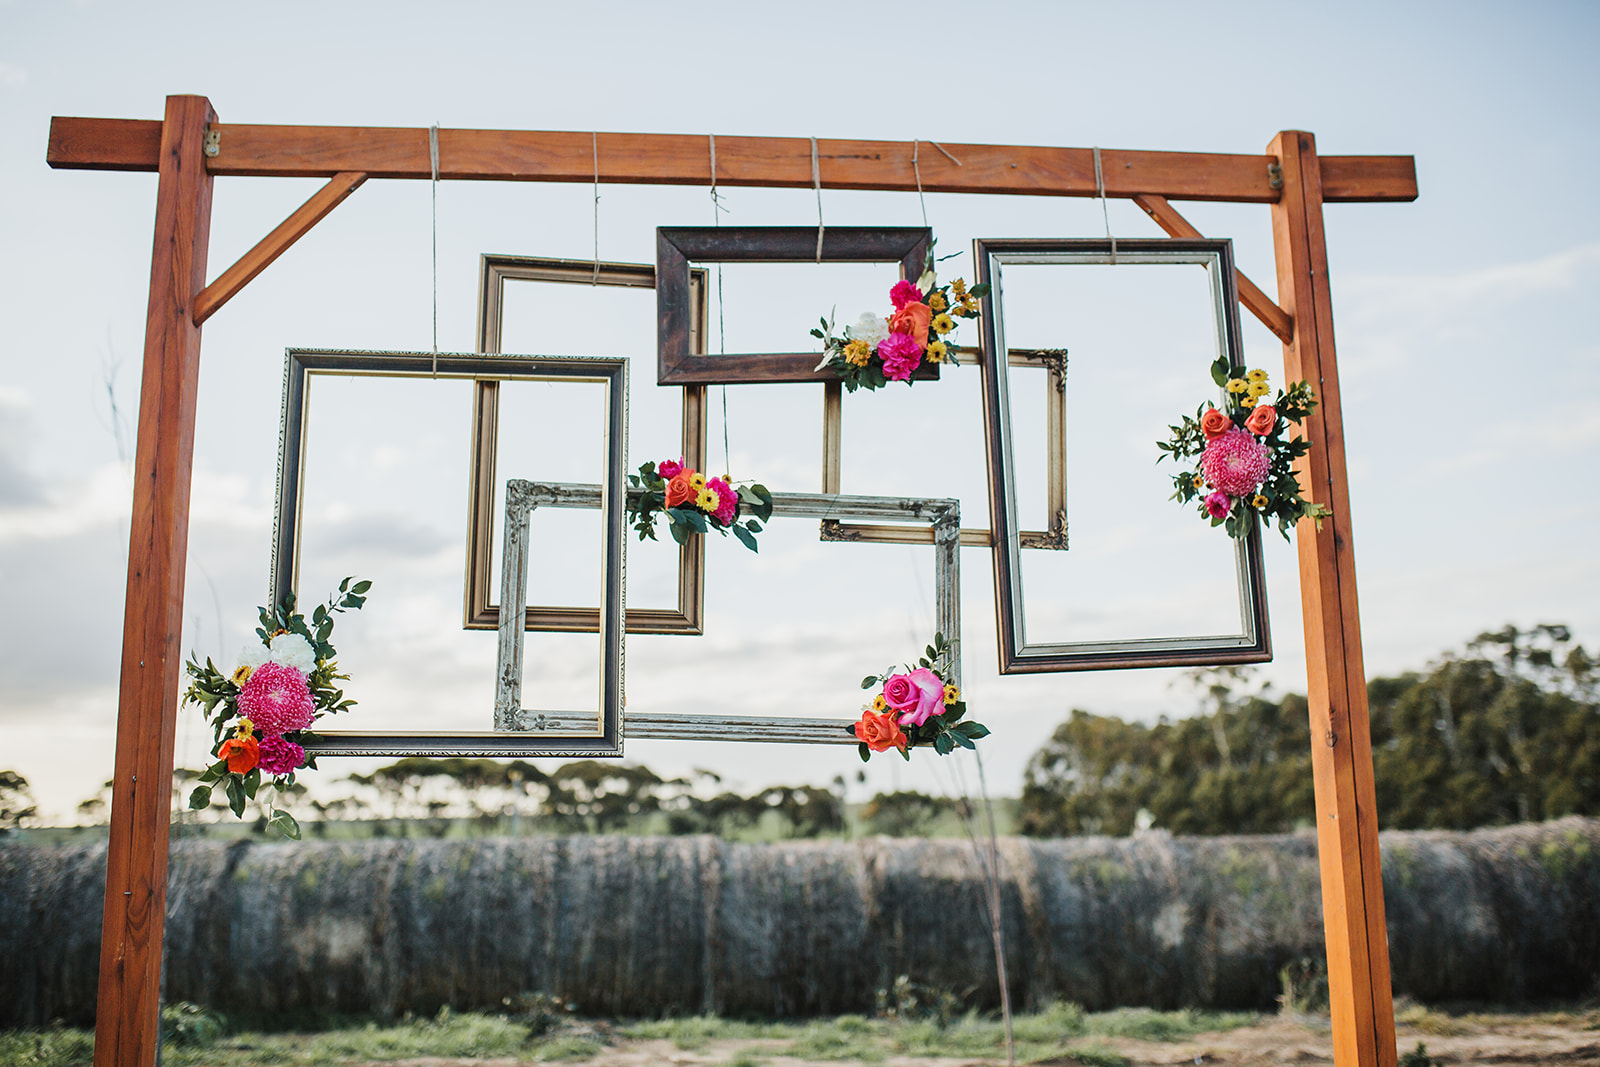 Redwing Farm Styled Shoot, Yorke Peninsula Destination Wedding Venue in the South Australian Countryside suitable for ceremony and reception with accommodation on site.